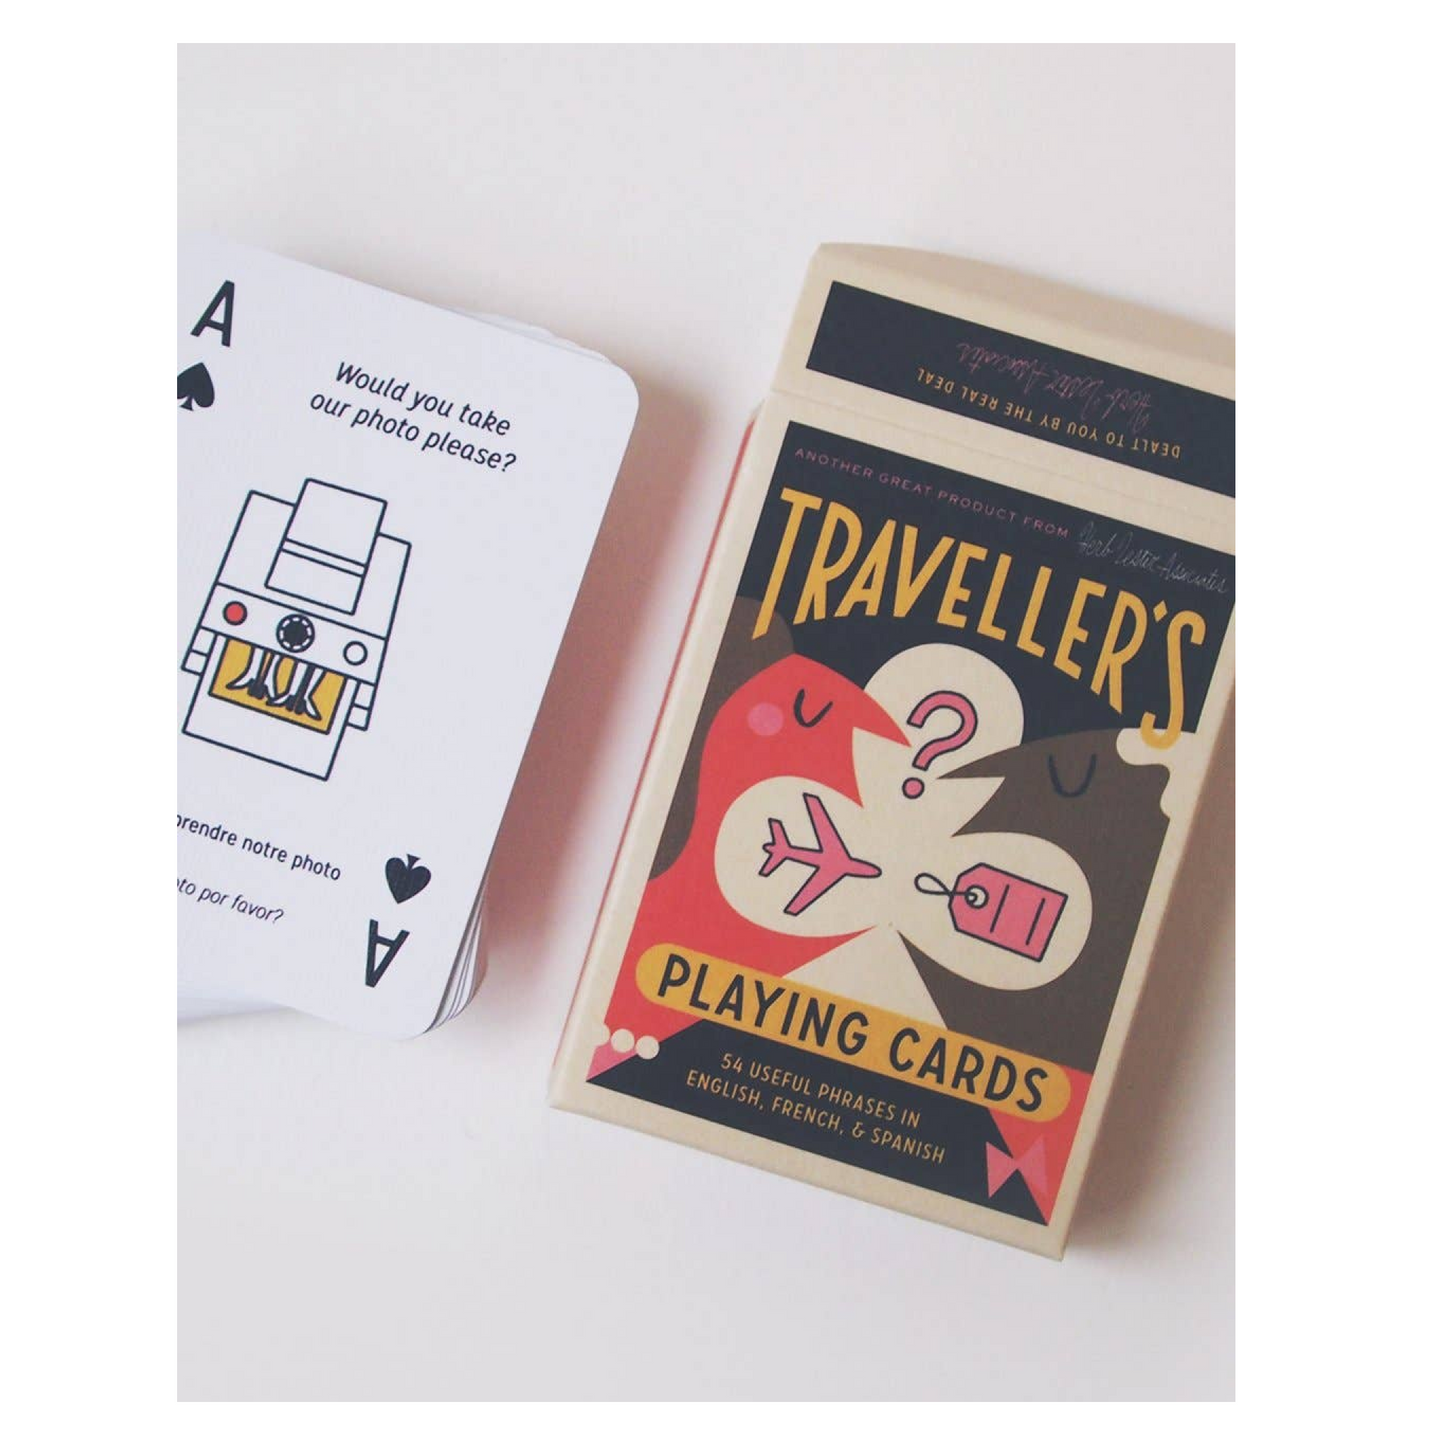 Traveller's Playing Cards